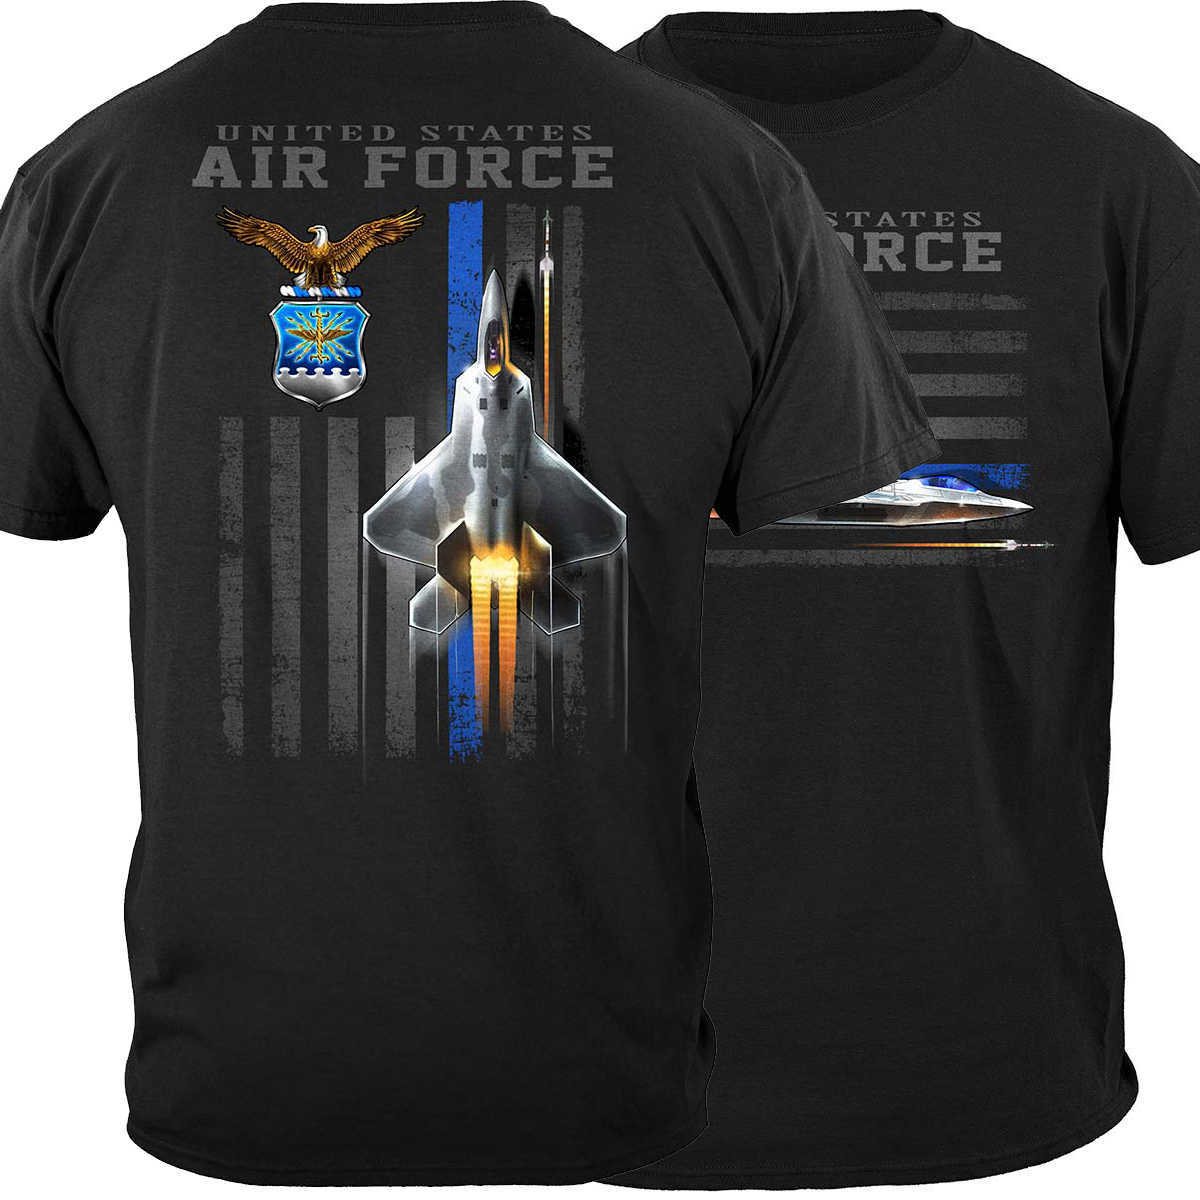 

Men's T-Shirts Bald Eagle Crest and Shield American Flag Jet Fighter US Air Force T-Shirt. Summer Cotton O-Neck Short Sleeve Mens T Shirt New L230217, Black